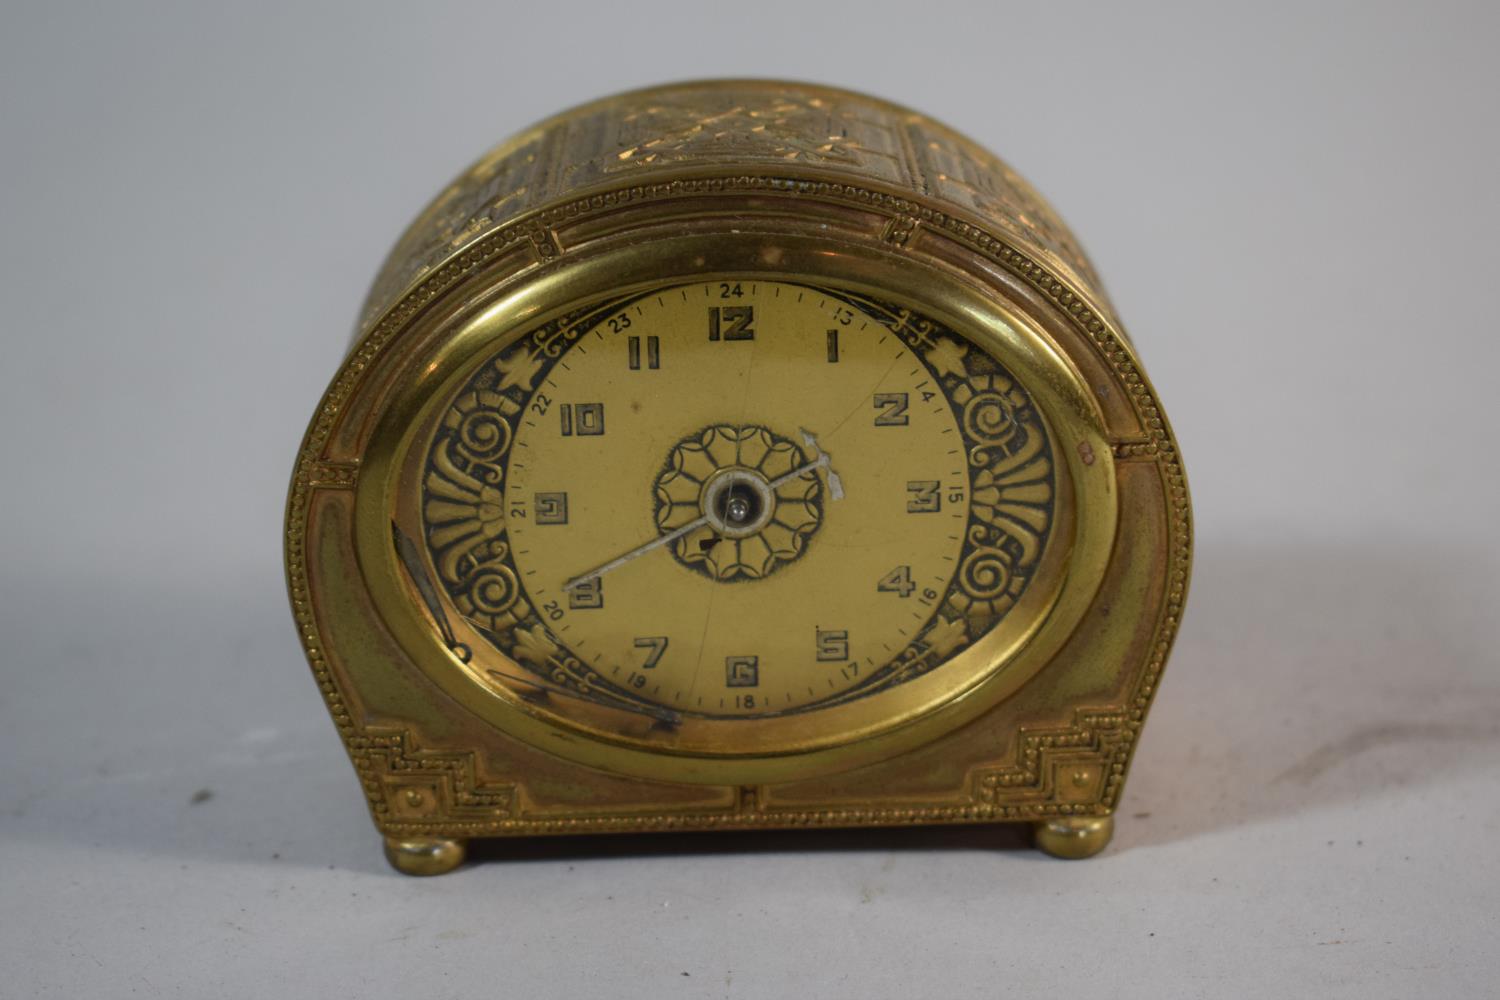 A Mid 20th Century Brass Alarm Clock with Body Decorated in Relief, Fingers Loose, Cracked Glass and